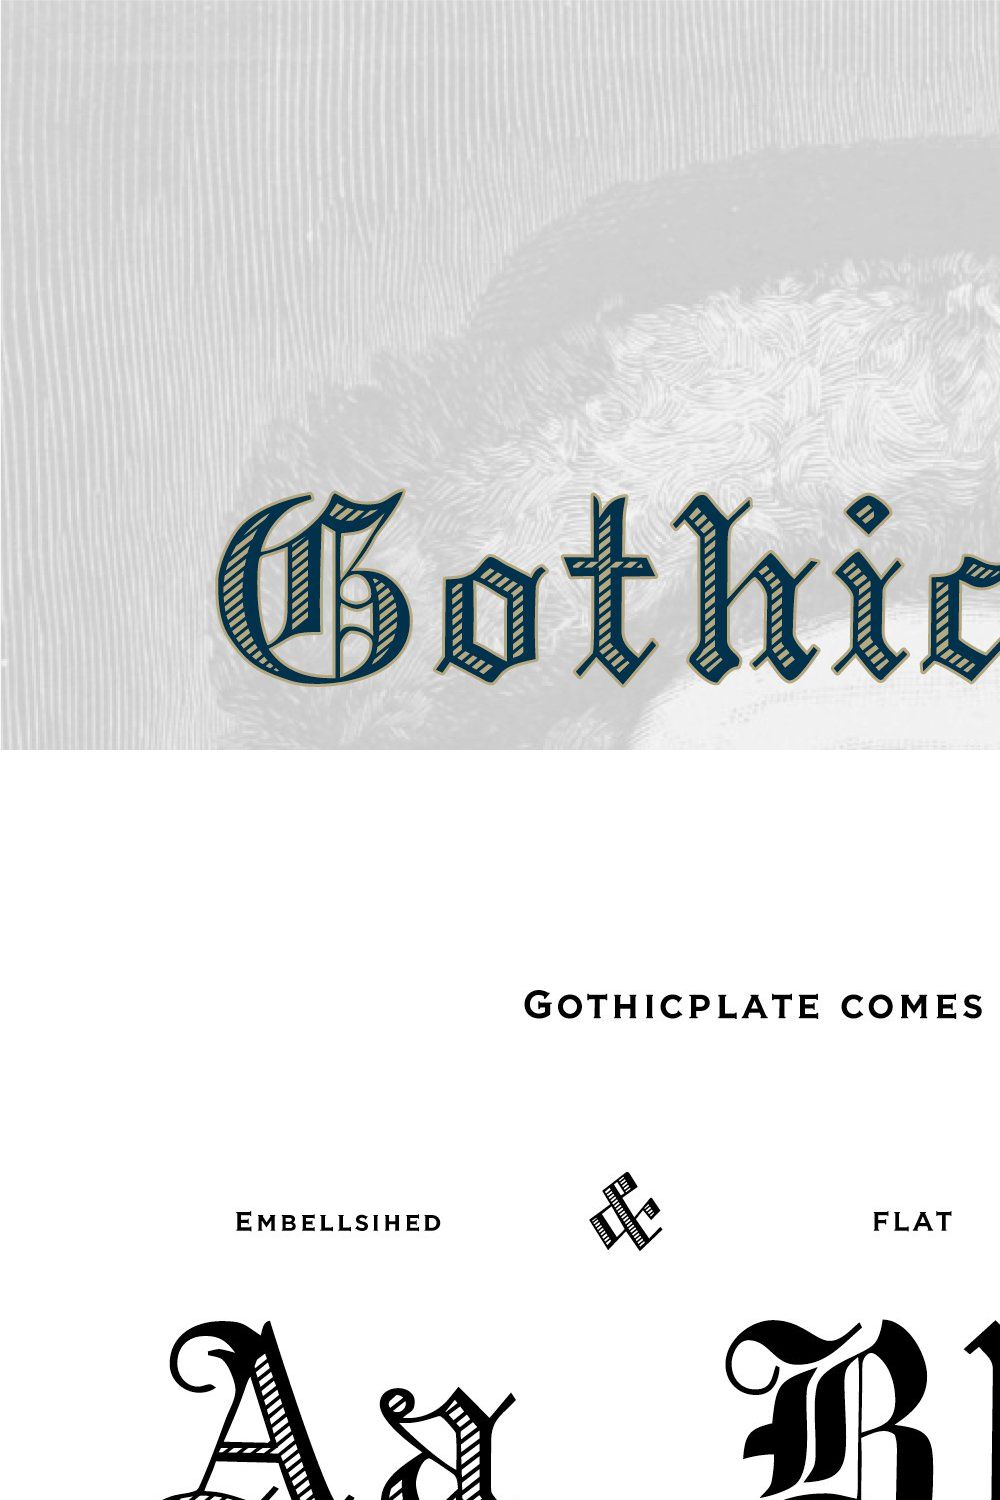 Gothicplate pinterest preview image.